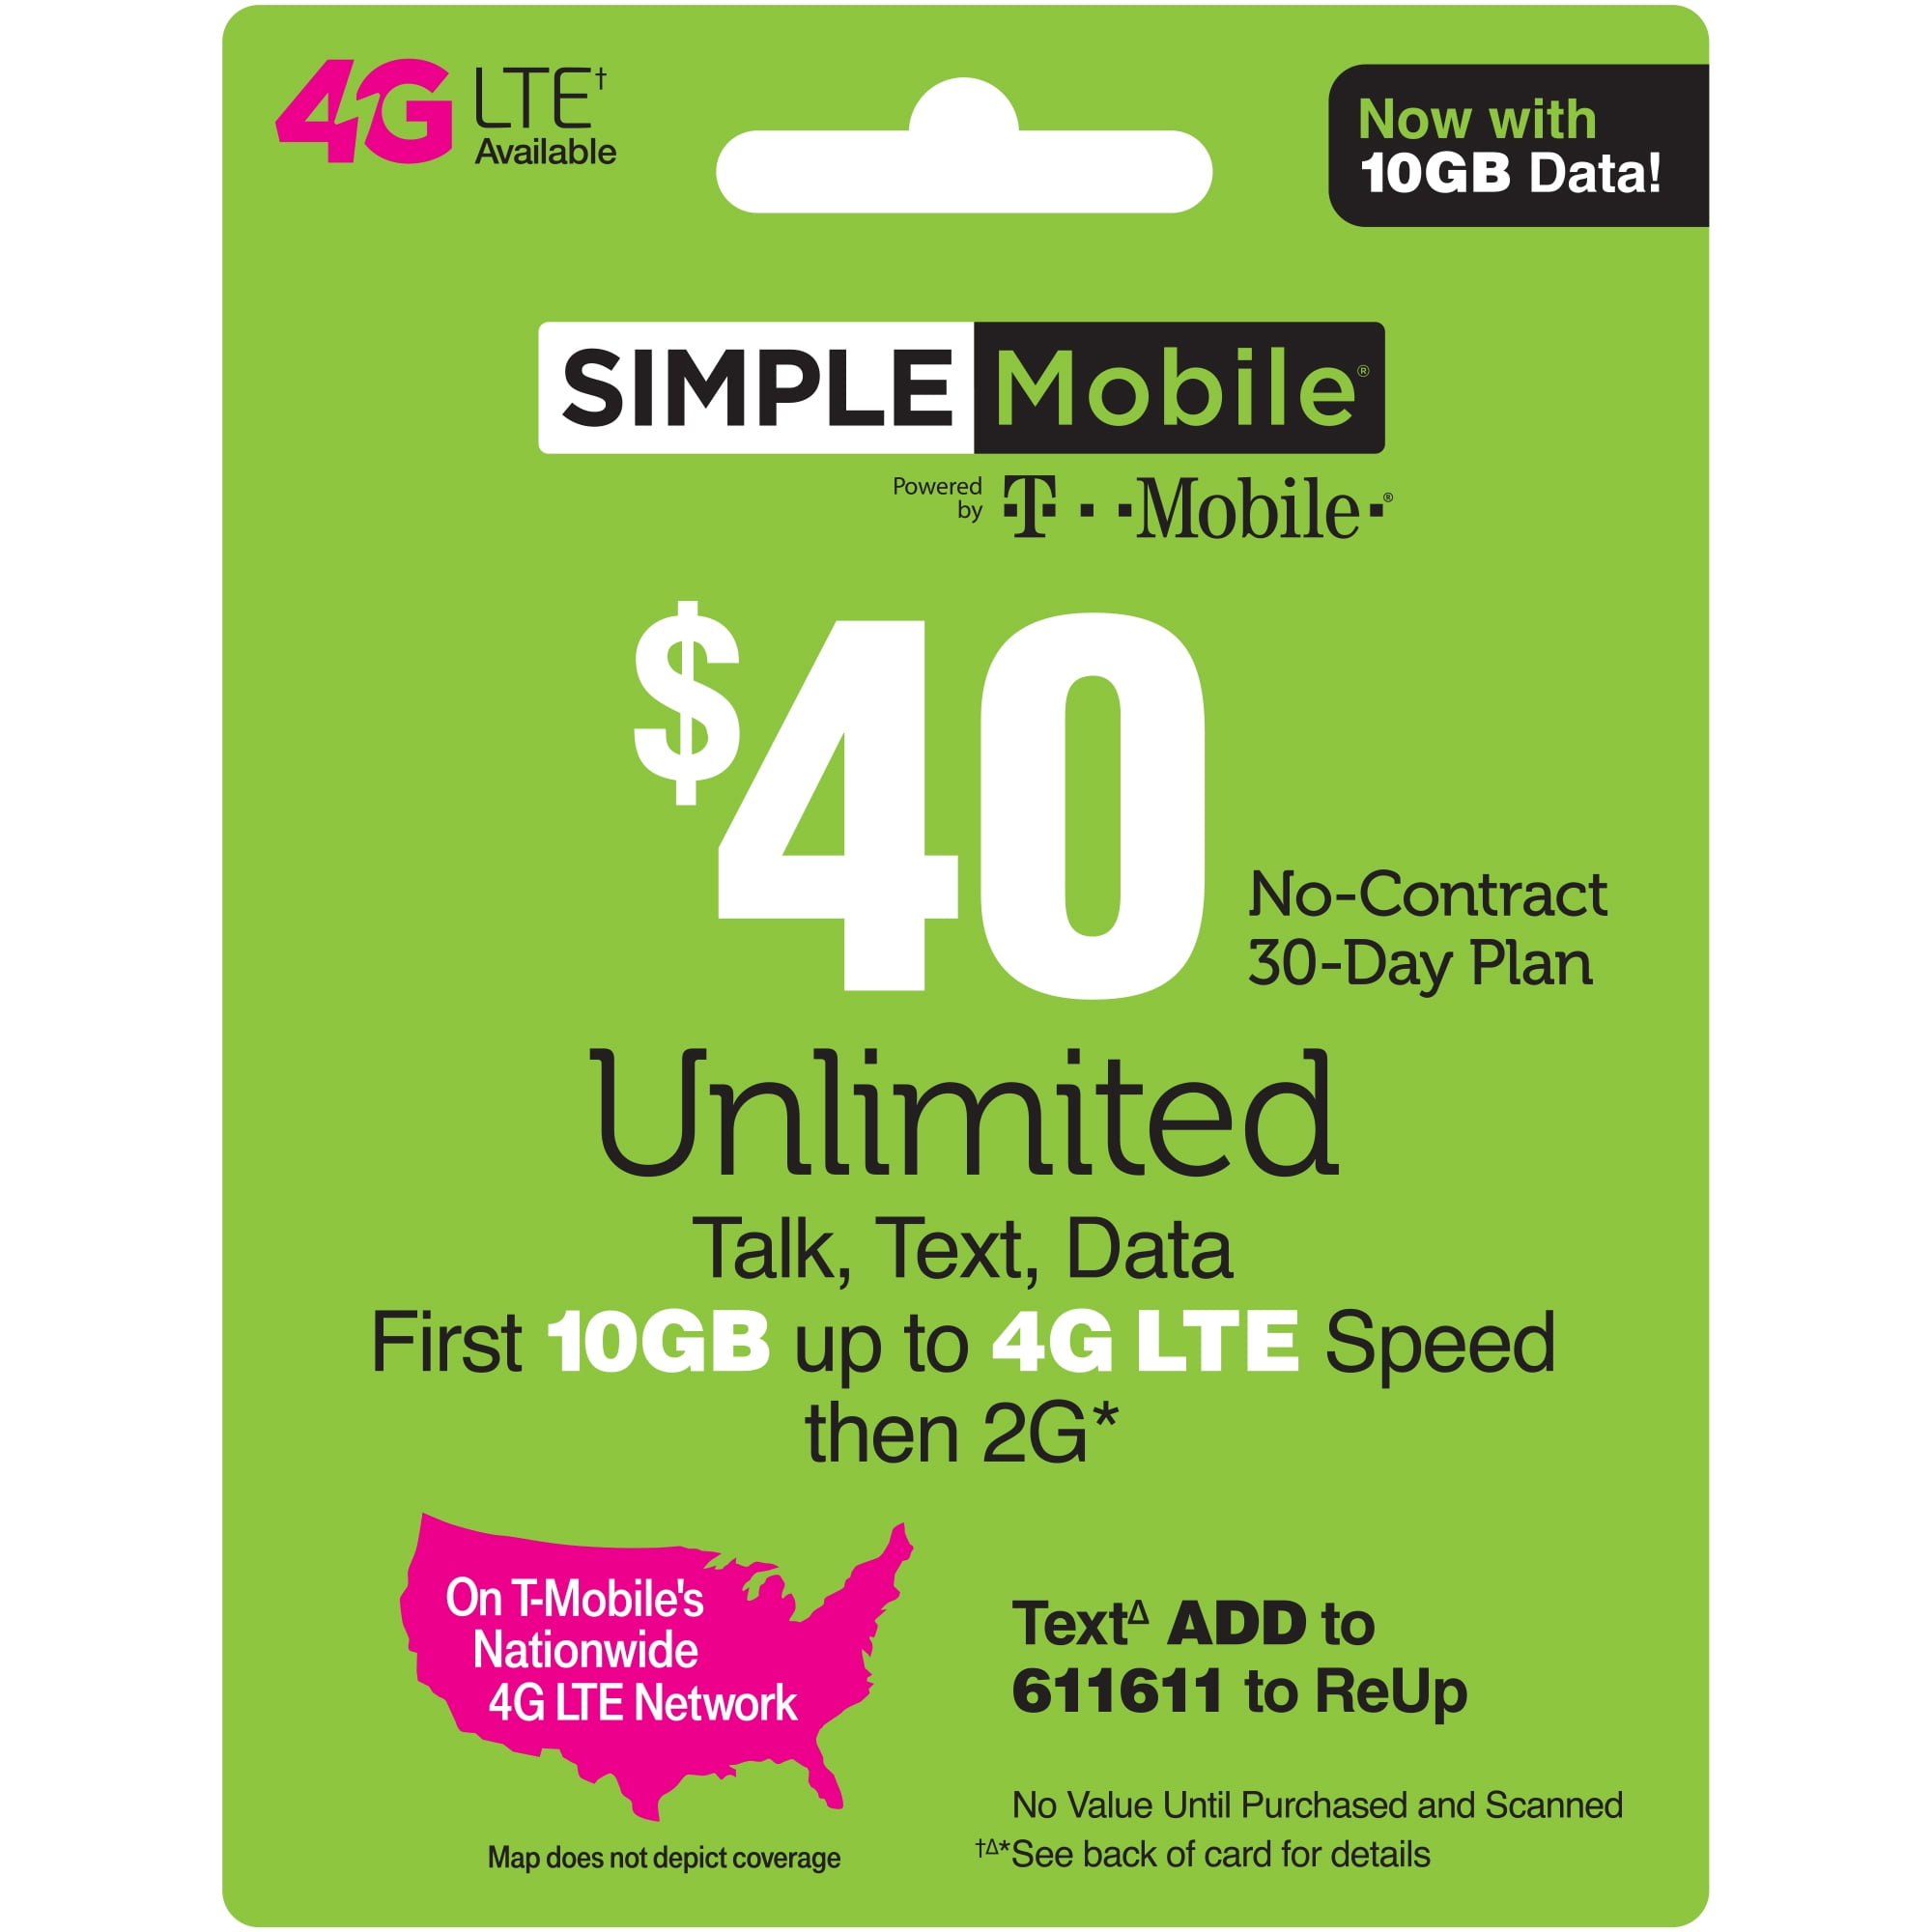 add airtime to straight talk phone with prepaid card